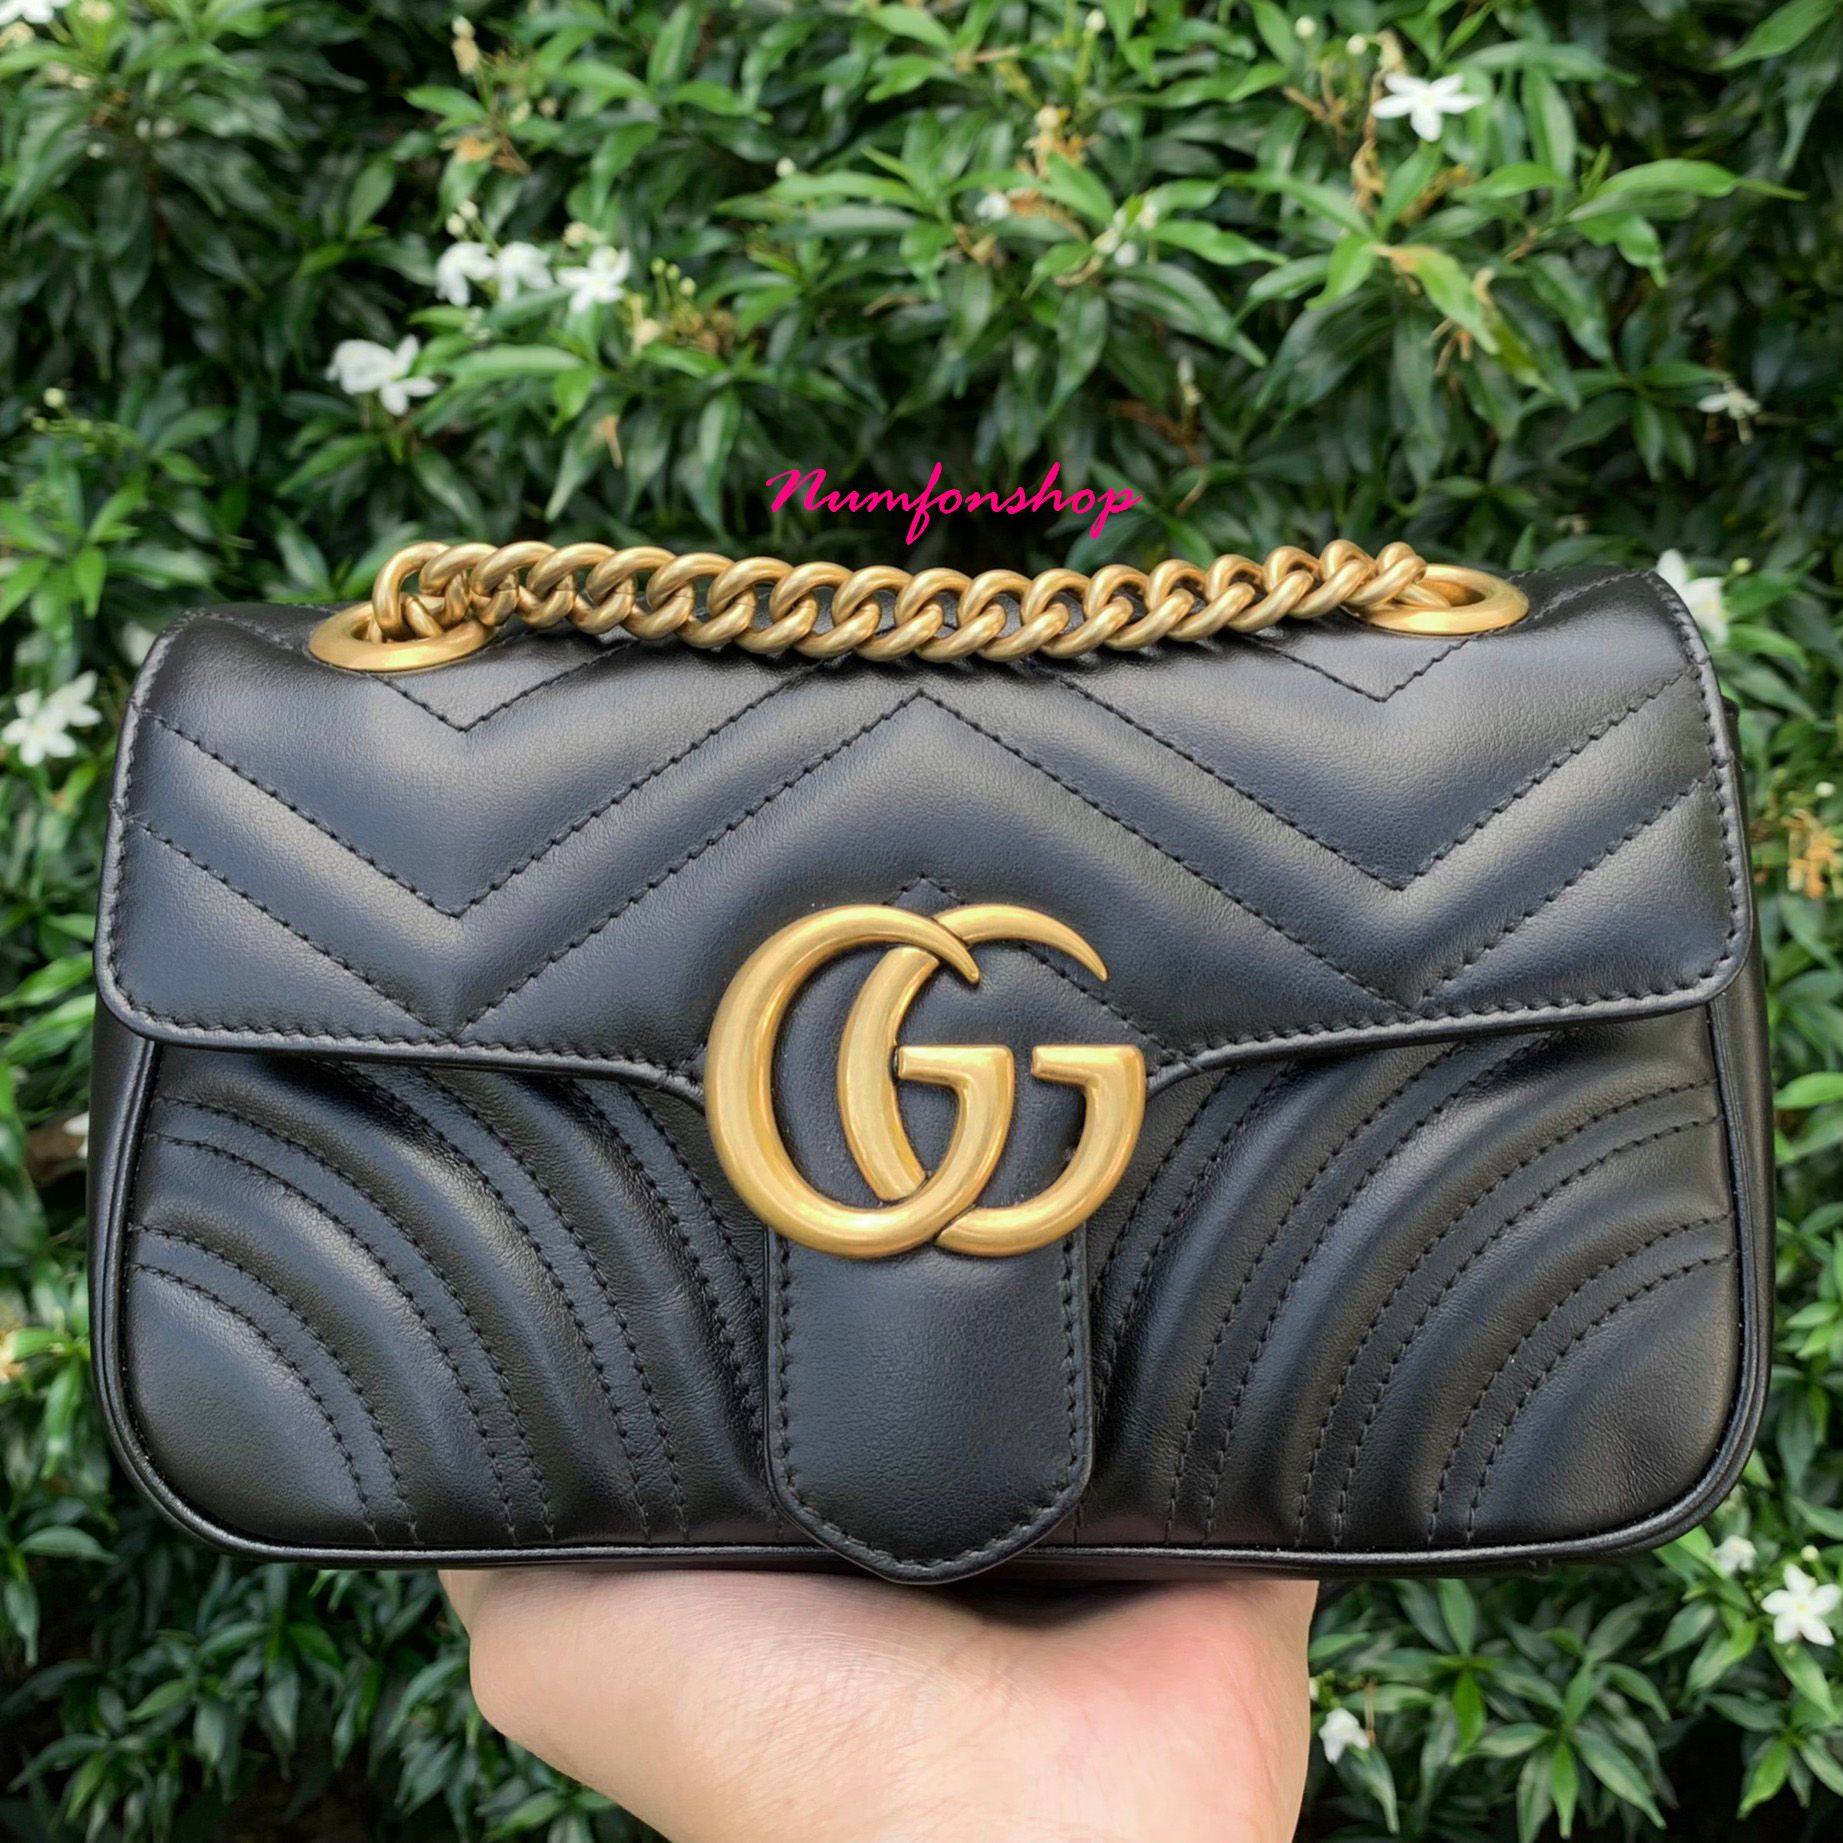 Basic theory horsepower glory Sold Gucci Marmont 22 cm